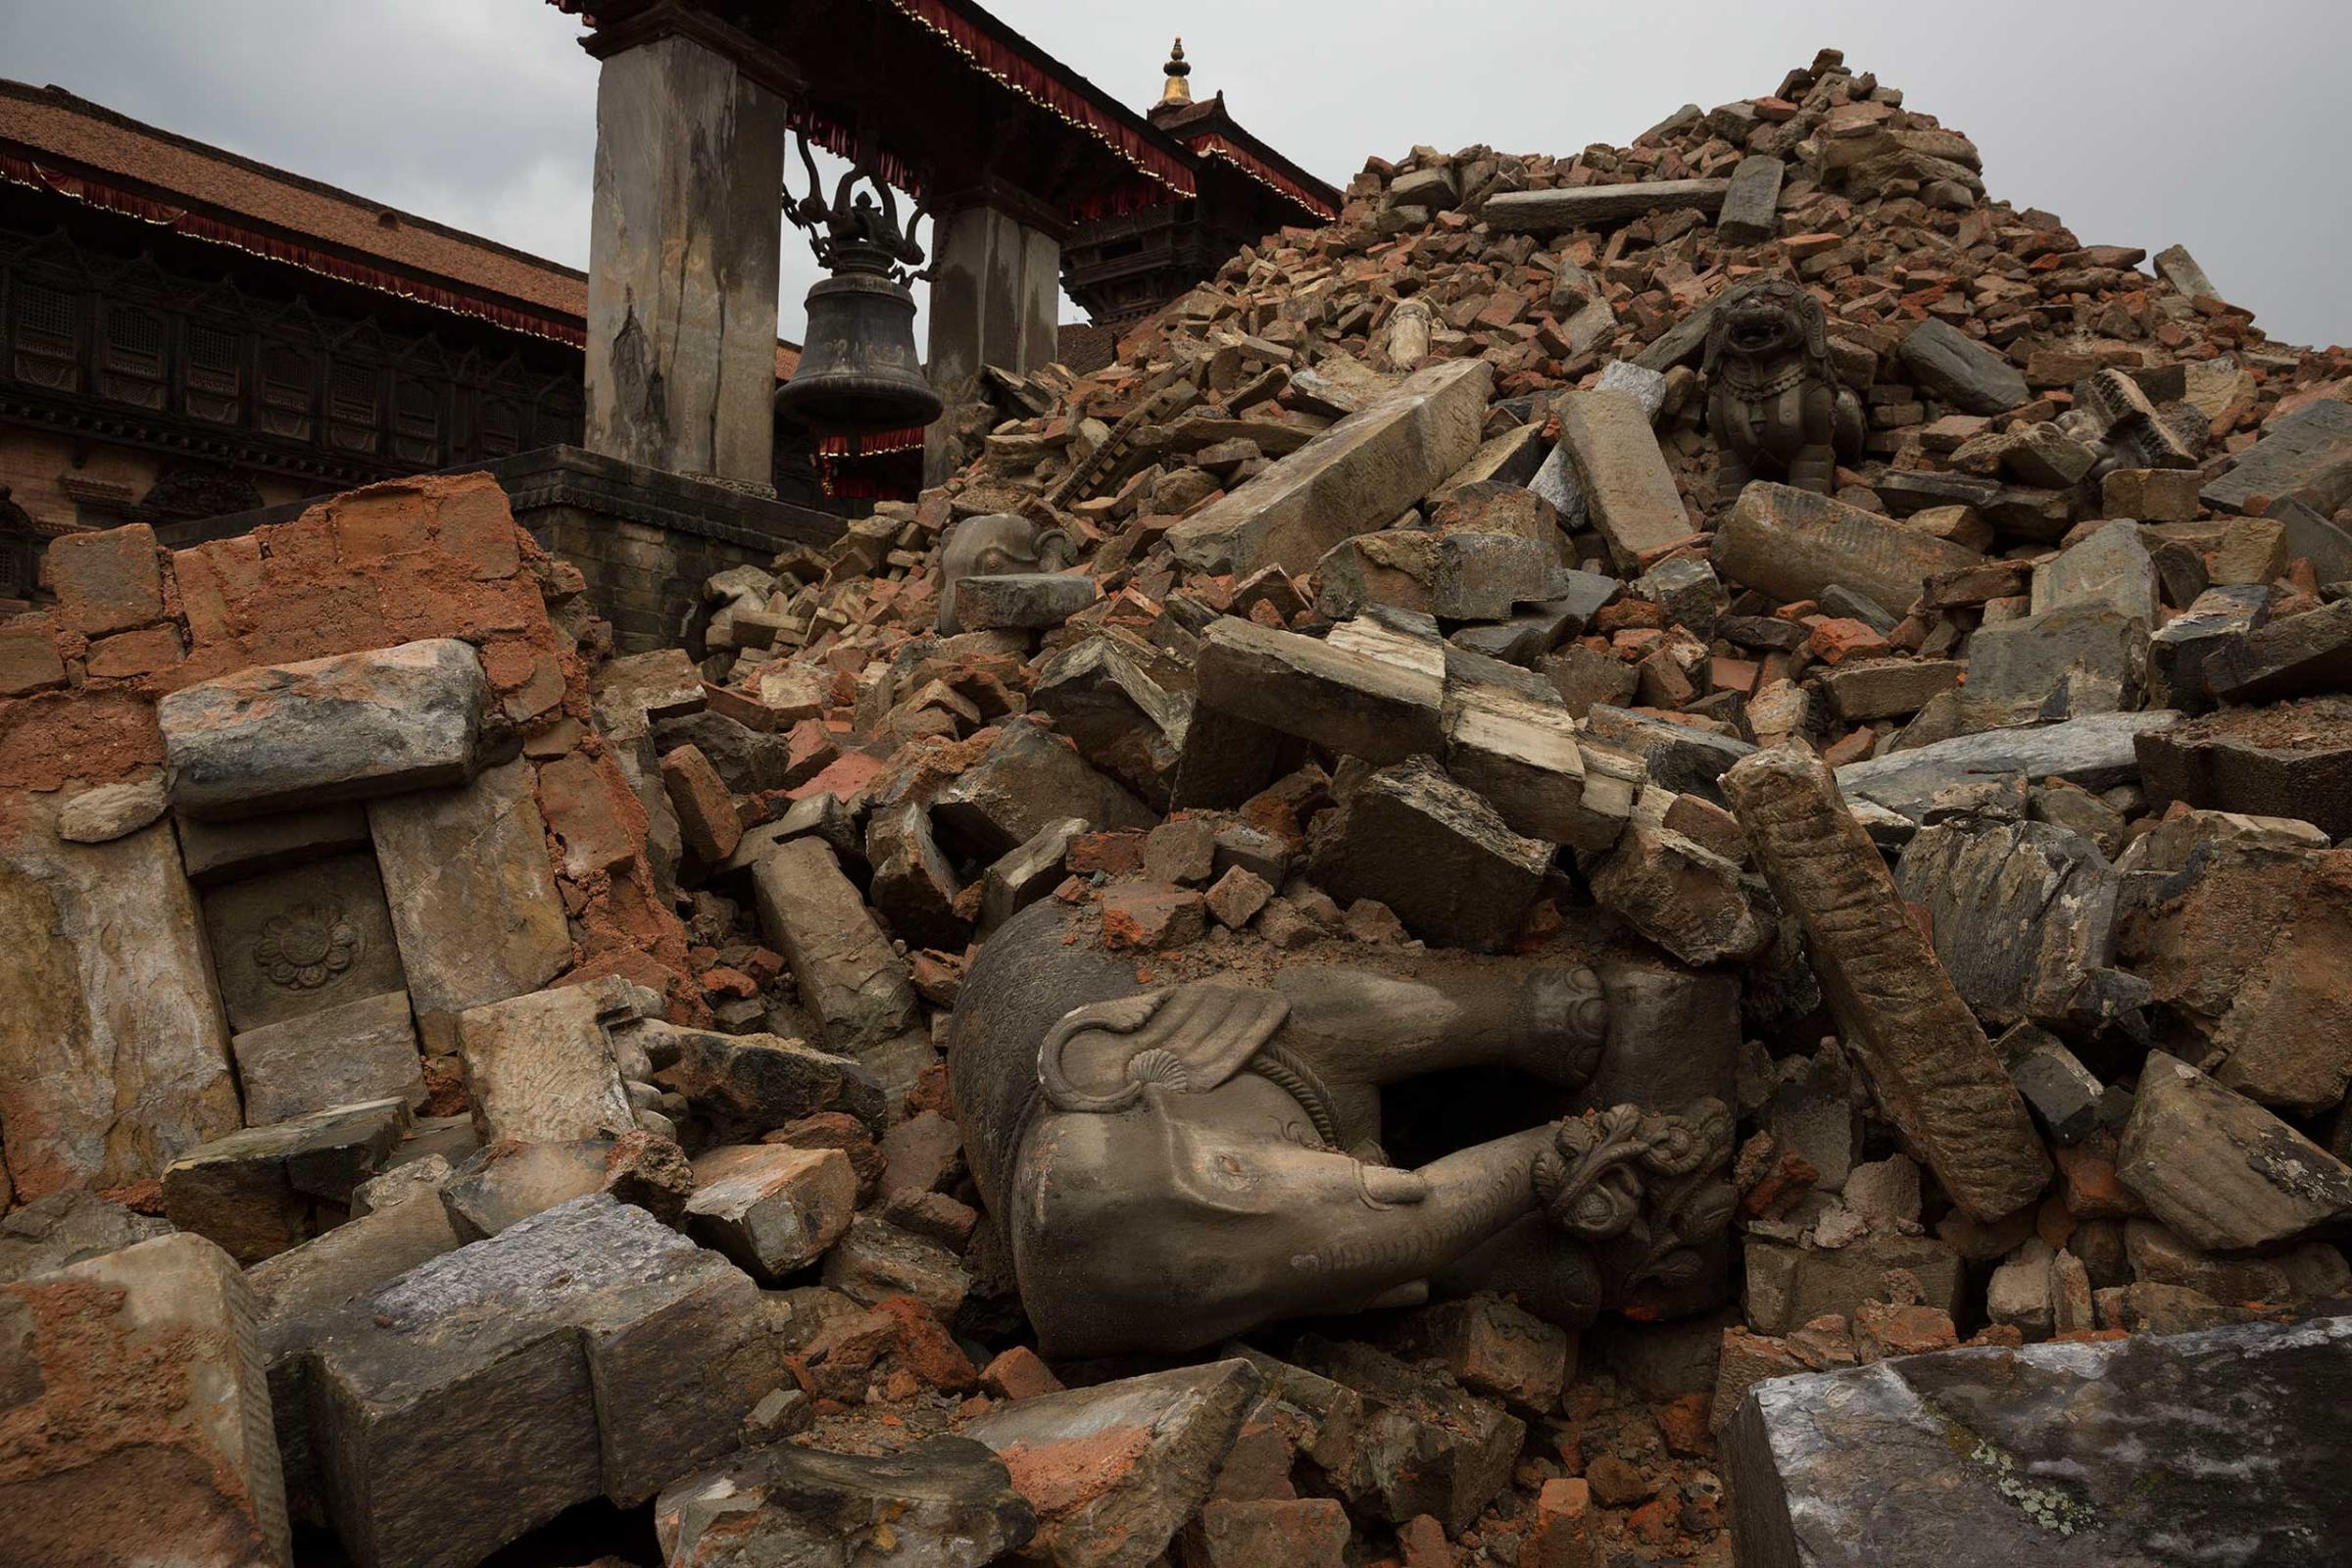 Nepal earthquake. Bhaktapur. A city near Katmandu. People reclaiming their possessions from the wreckage. A man who had been buried and died being pulled out of the wreckage by there Nepali Army rescue team. Sculpture of elephant in ruins of an ancient, sacred temple.by James Nachtwey